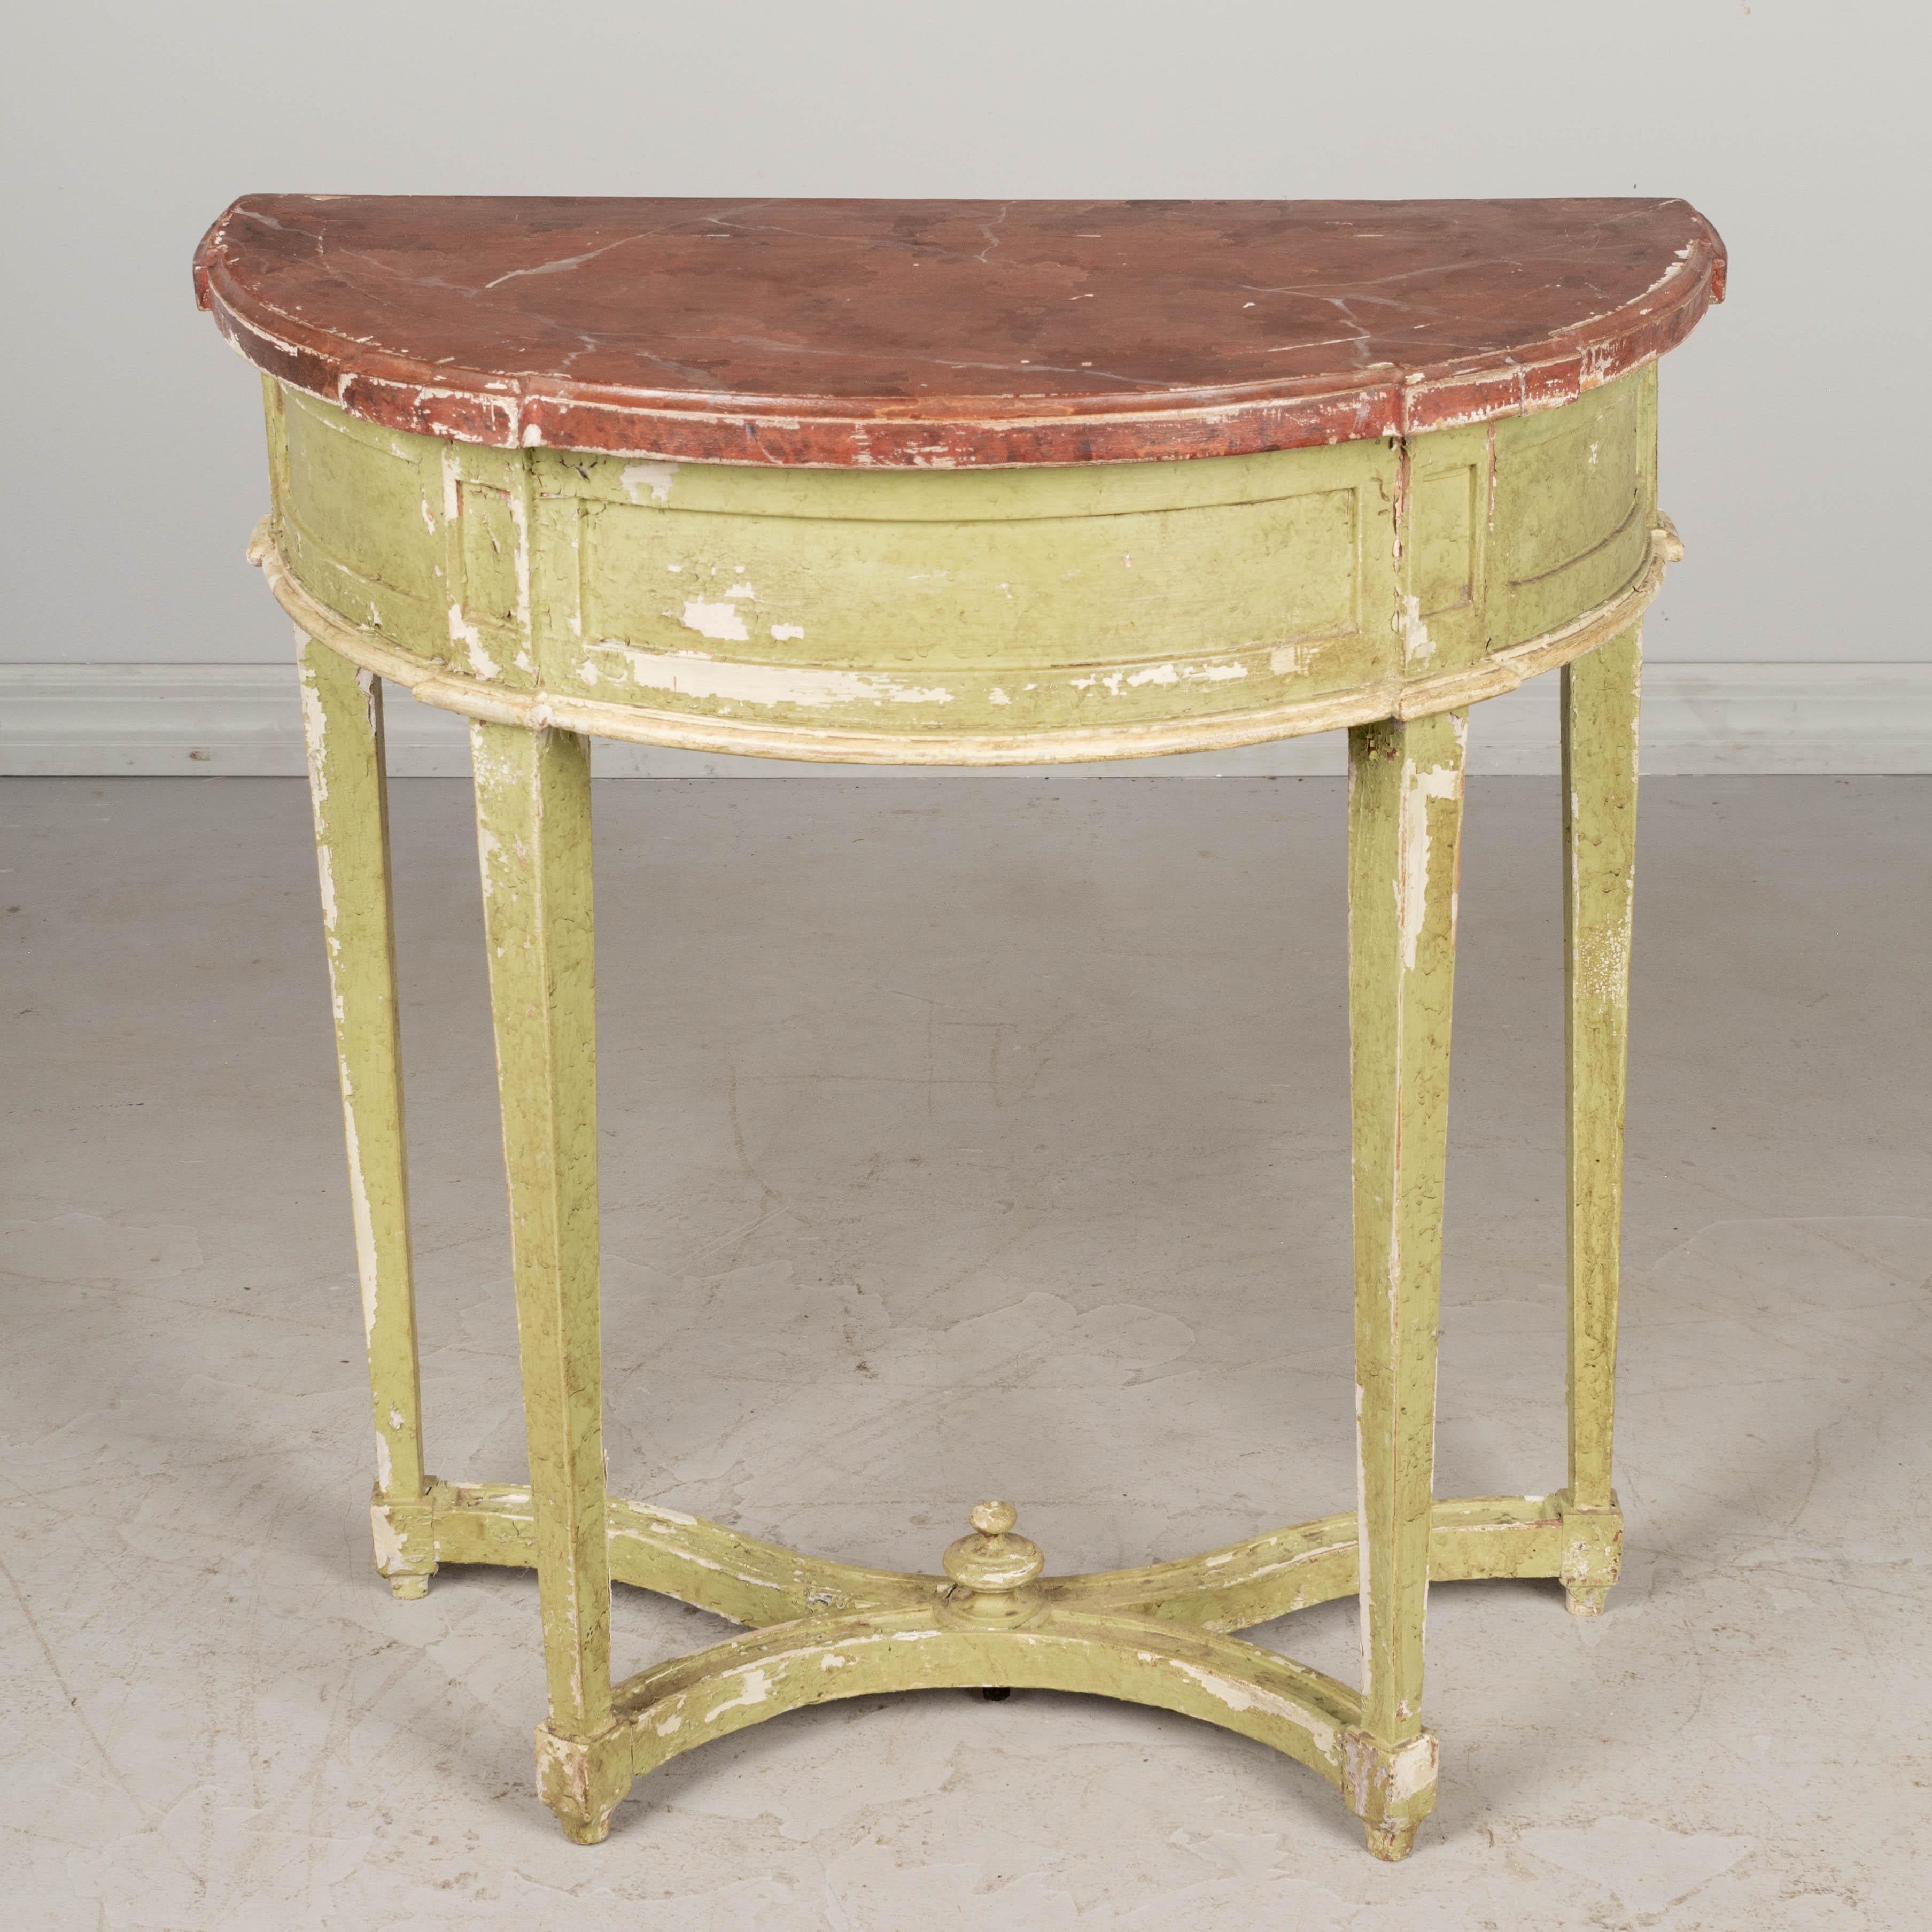 A Louis XVI style French demilune wood console table with pale green painted finish and realistic looking faux painted red marble top. Tapered legs supported by a curved stretcher with small turned finial decoration. Original finish with some